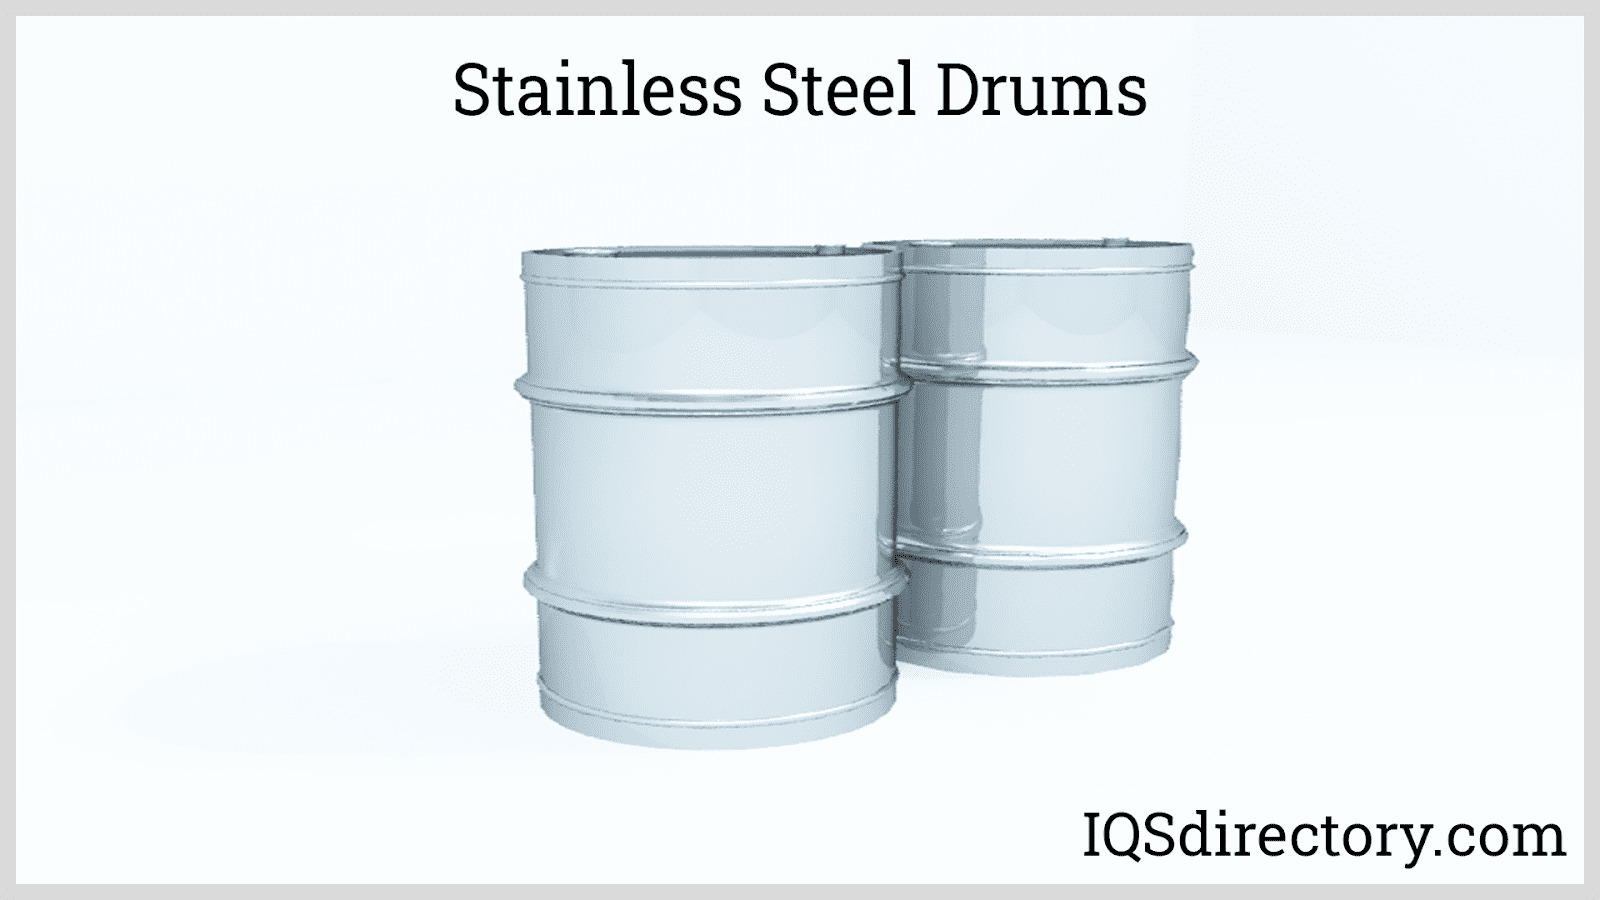 Learn Everything About Types of Storage 55 Gallon Drums